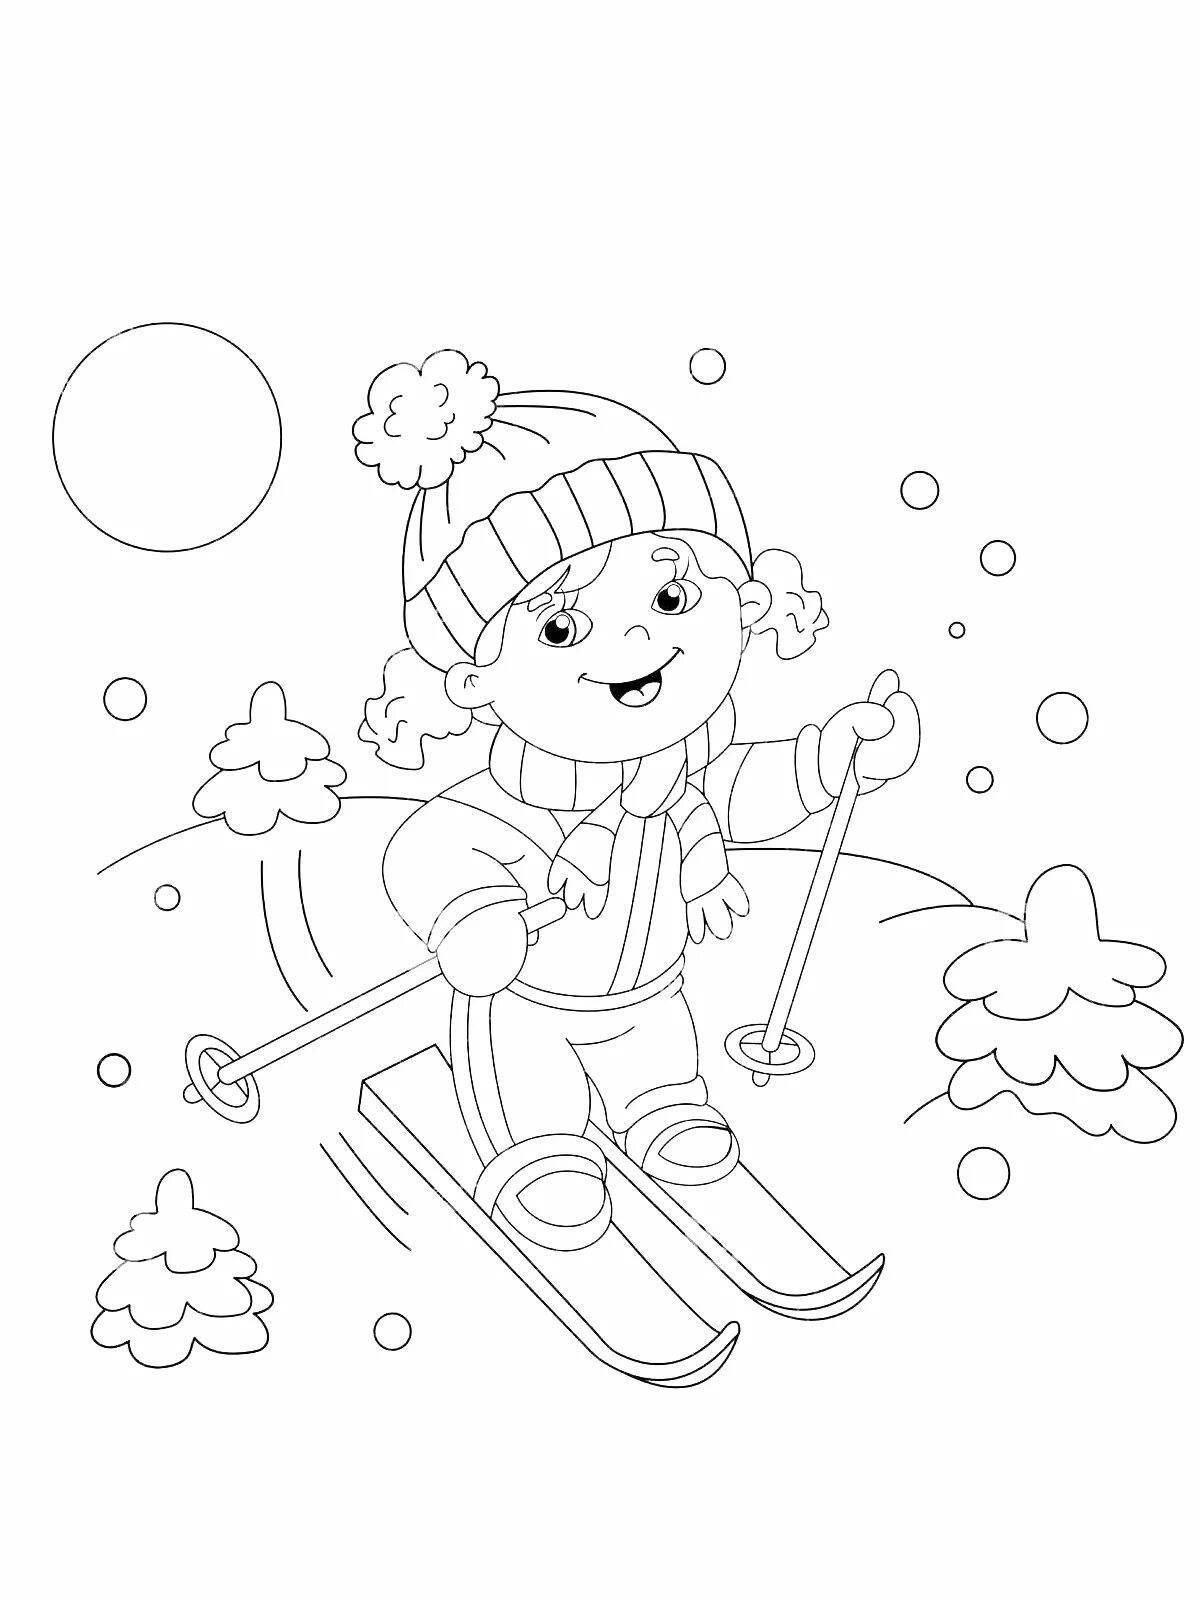 Fantastic winter sports coloring page